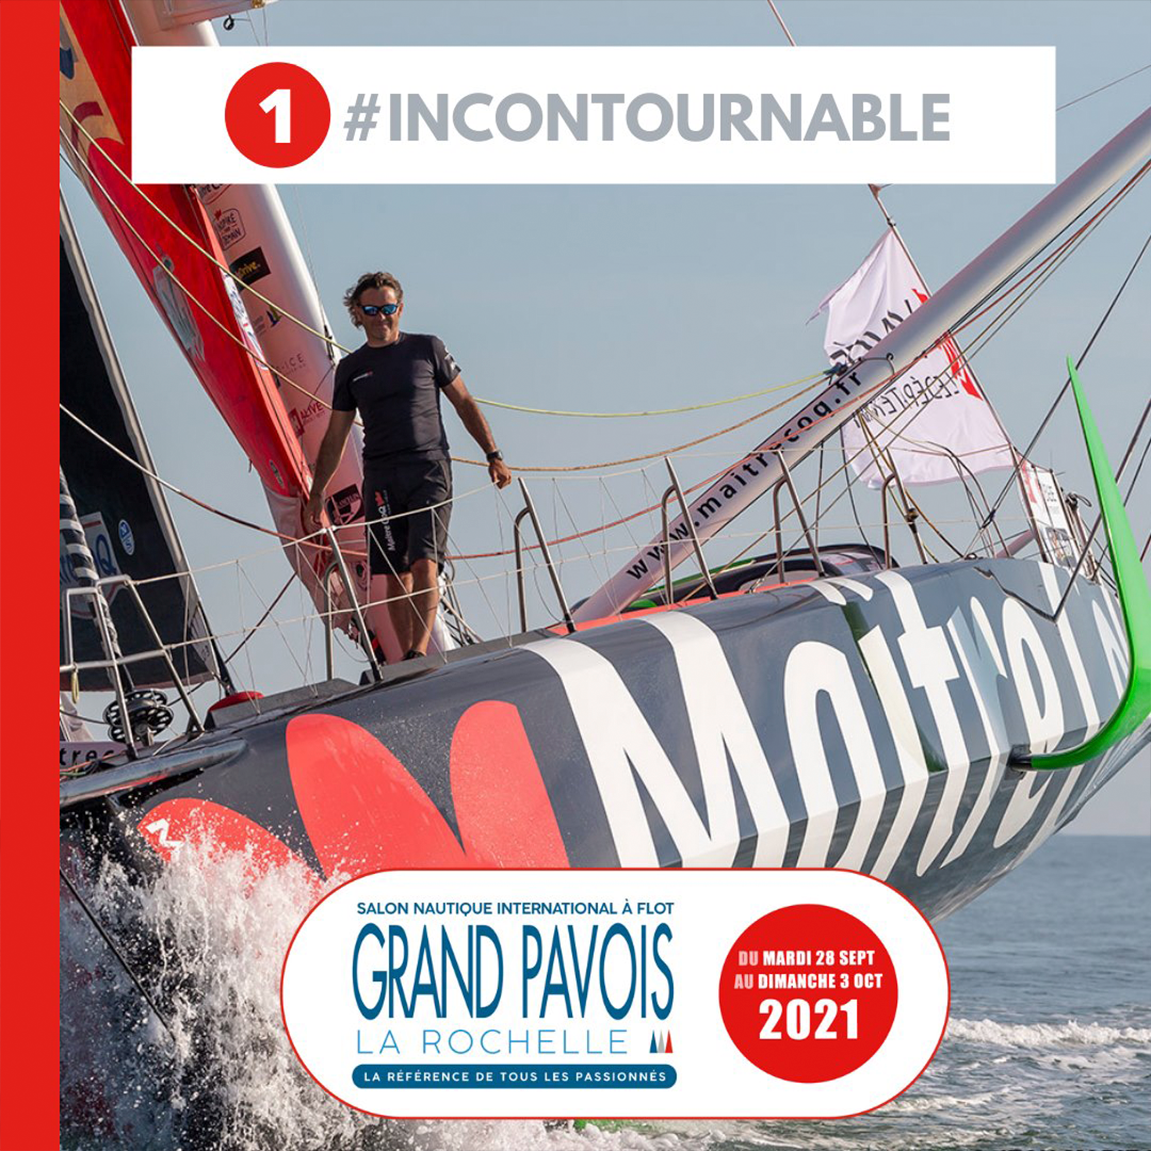 10 UNMISSABLE EVENTS AT THE GRAND PAVOIS LA ROCHELLE 2021.